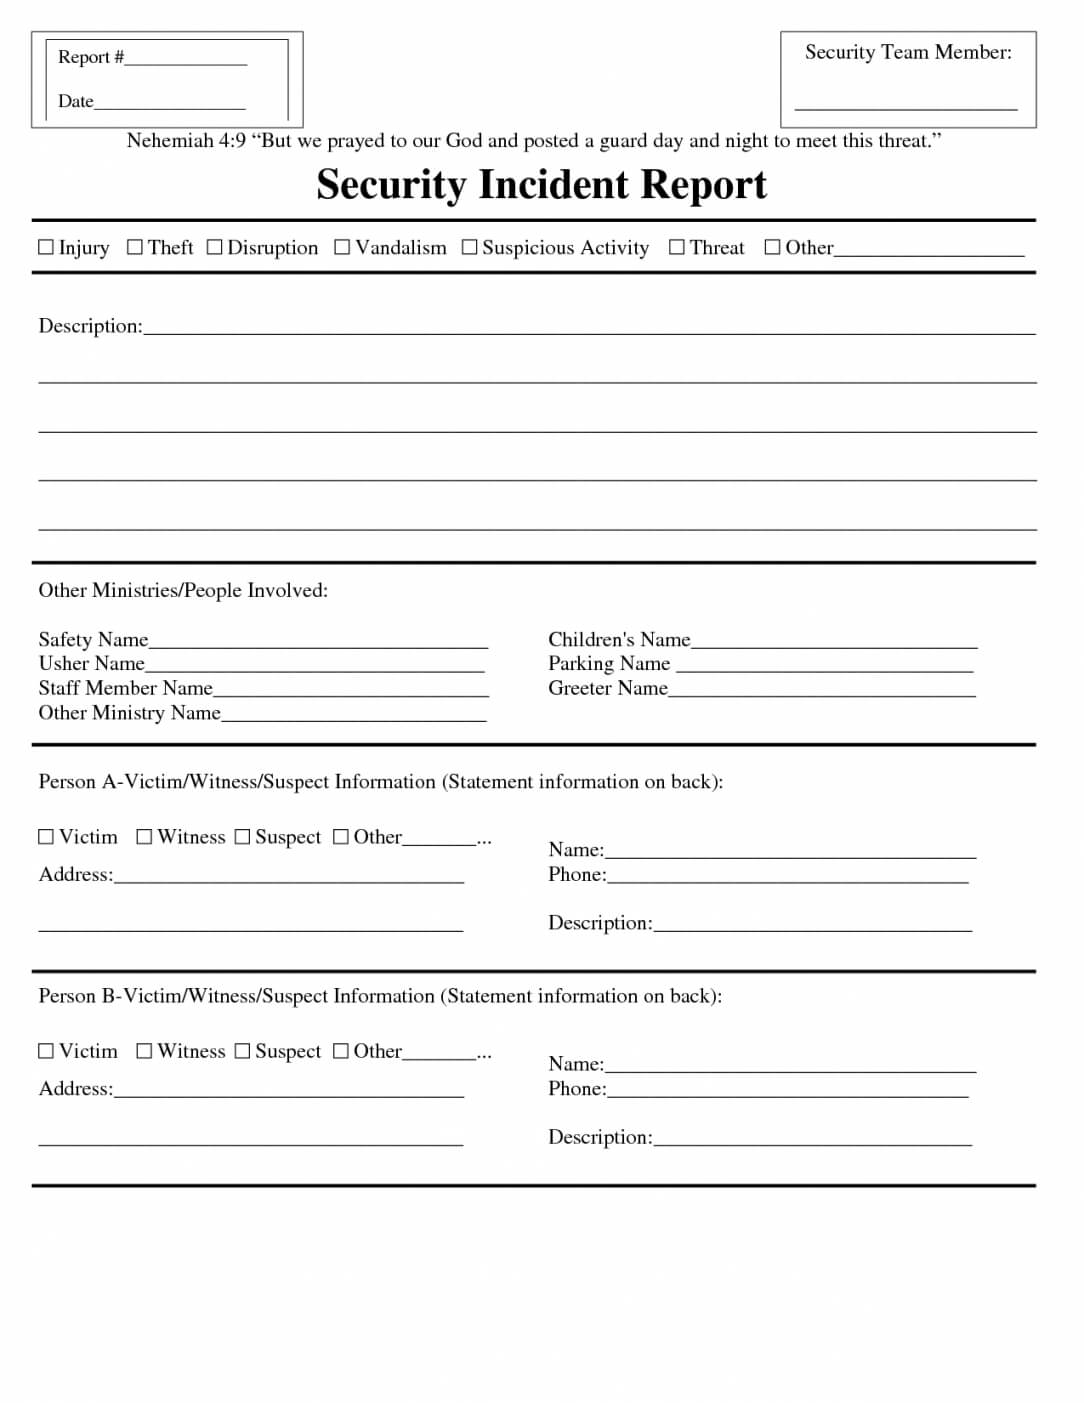 Security Incident Report Template Pdf – Funf.pandroid.co Regarding Information Security Report Template